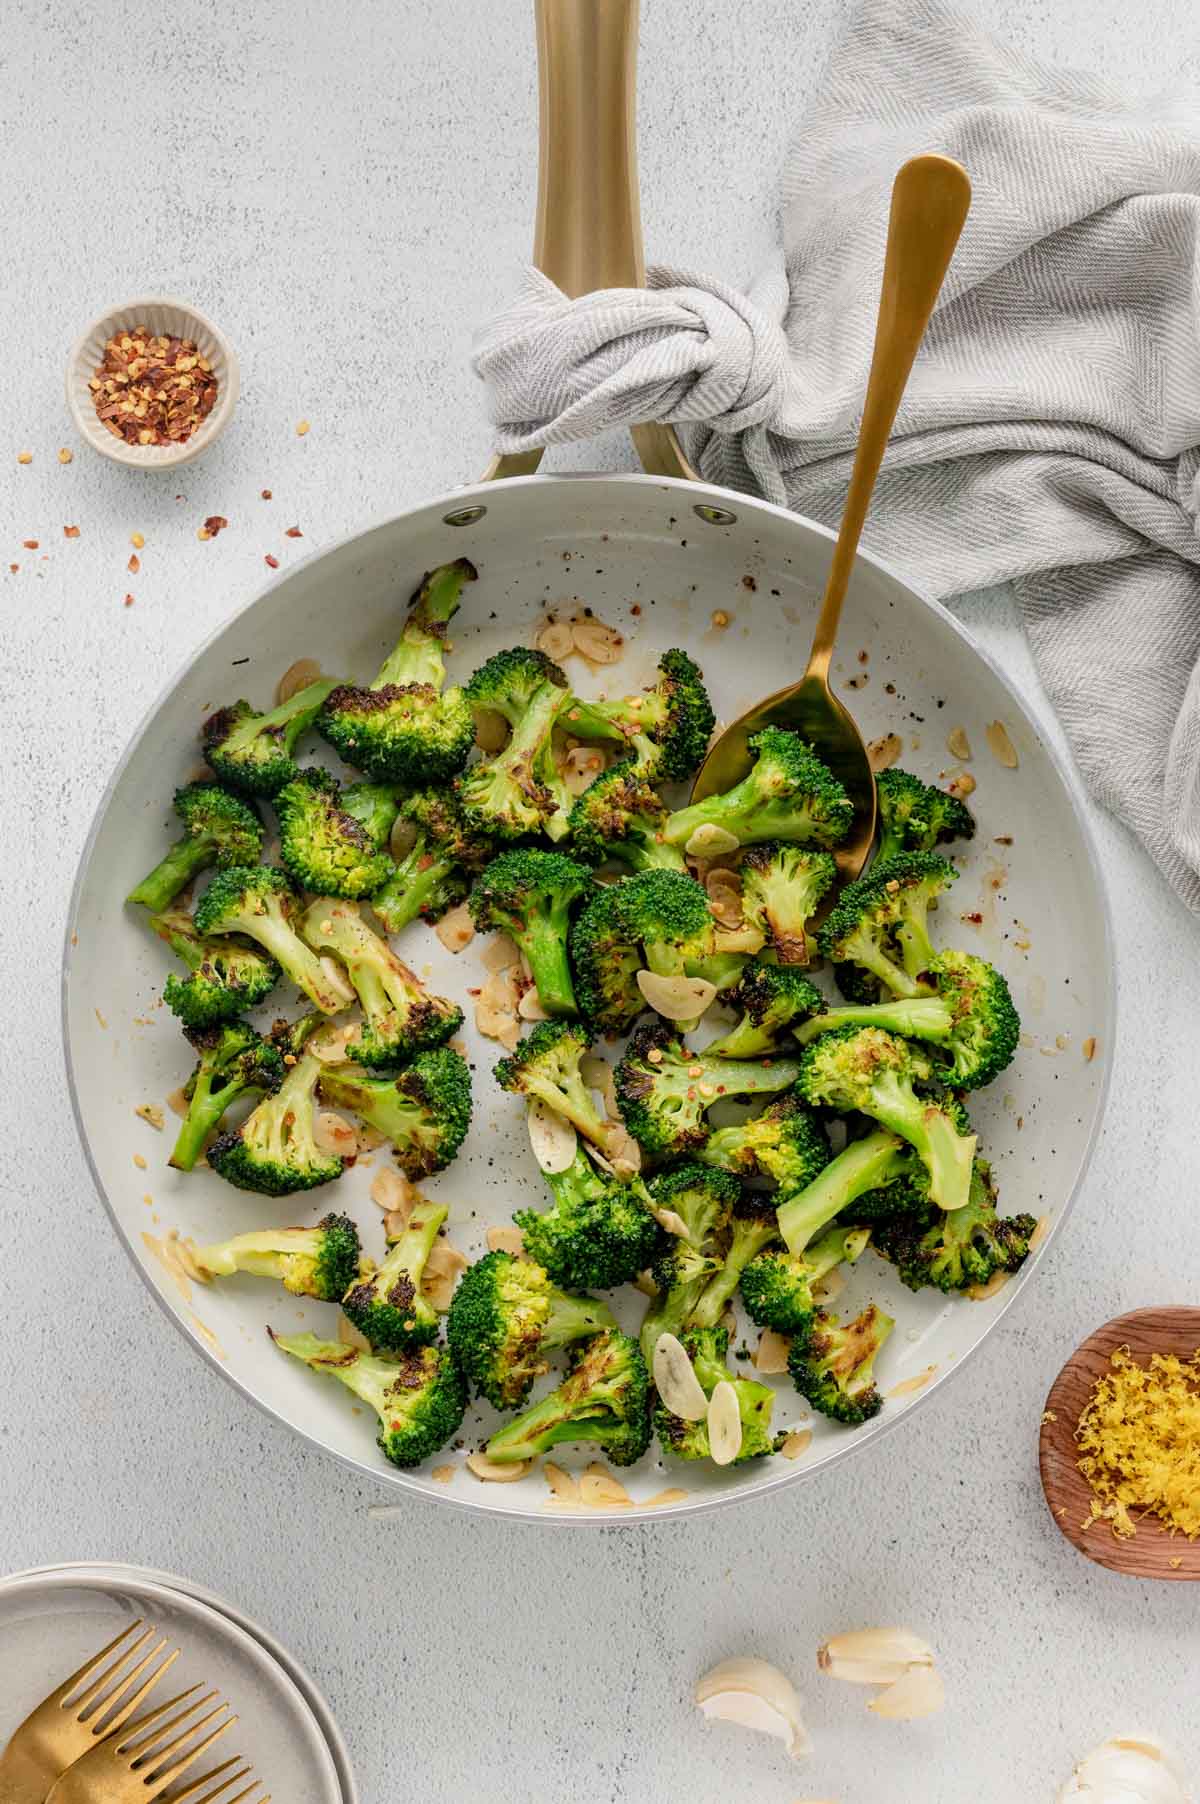 Sauteed broccoli with red pepper flakes in a white serving platter with a gold serving spoon.